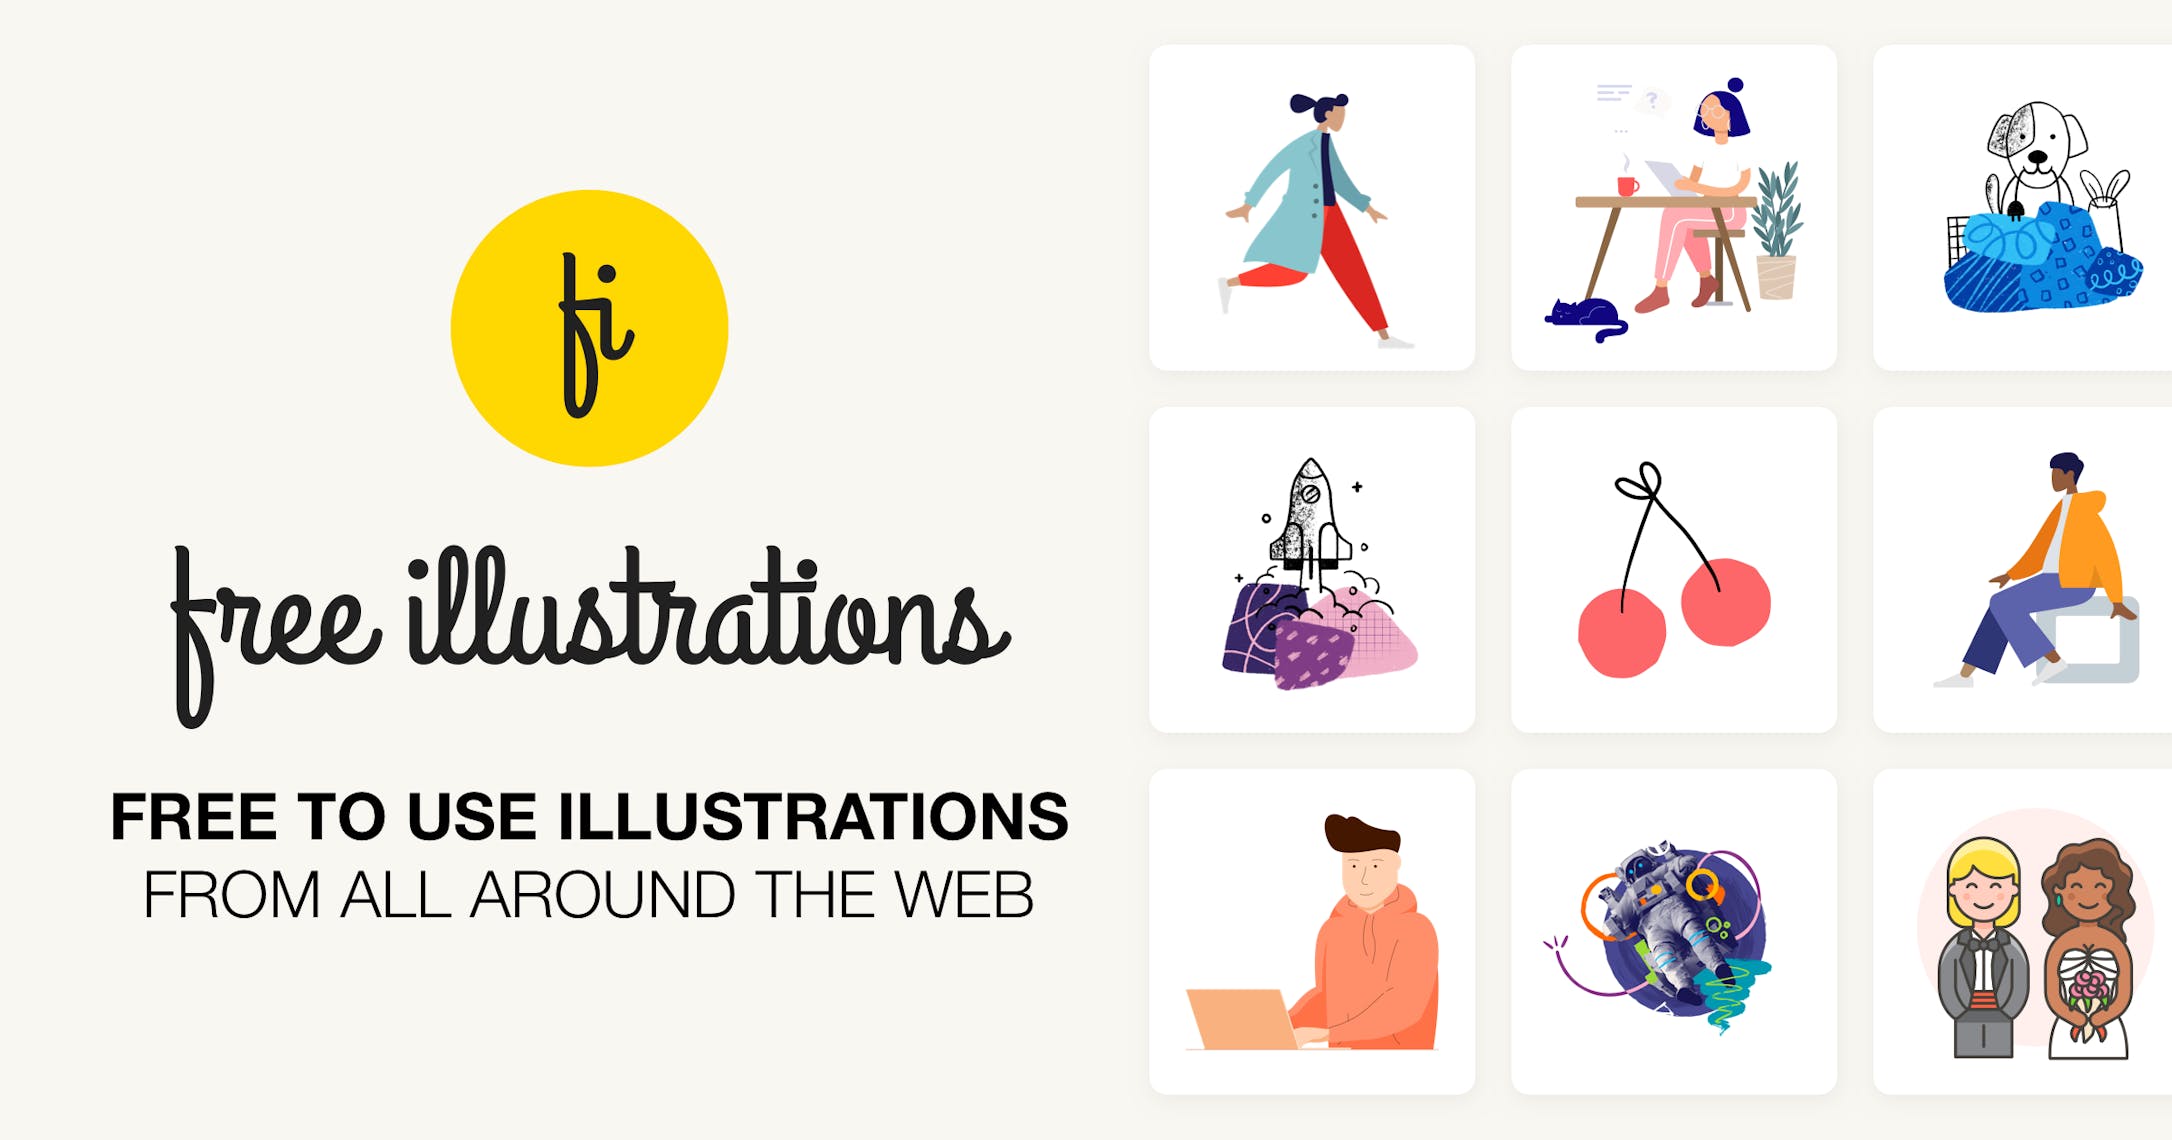 where can i find free illustrations to download